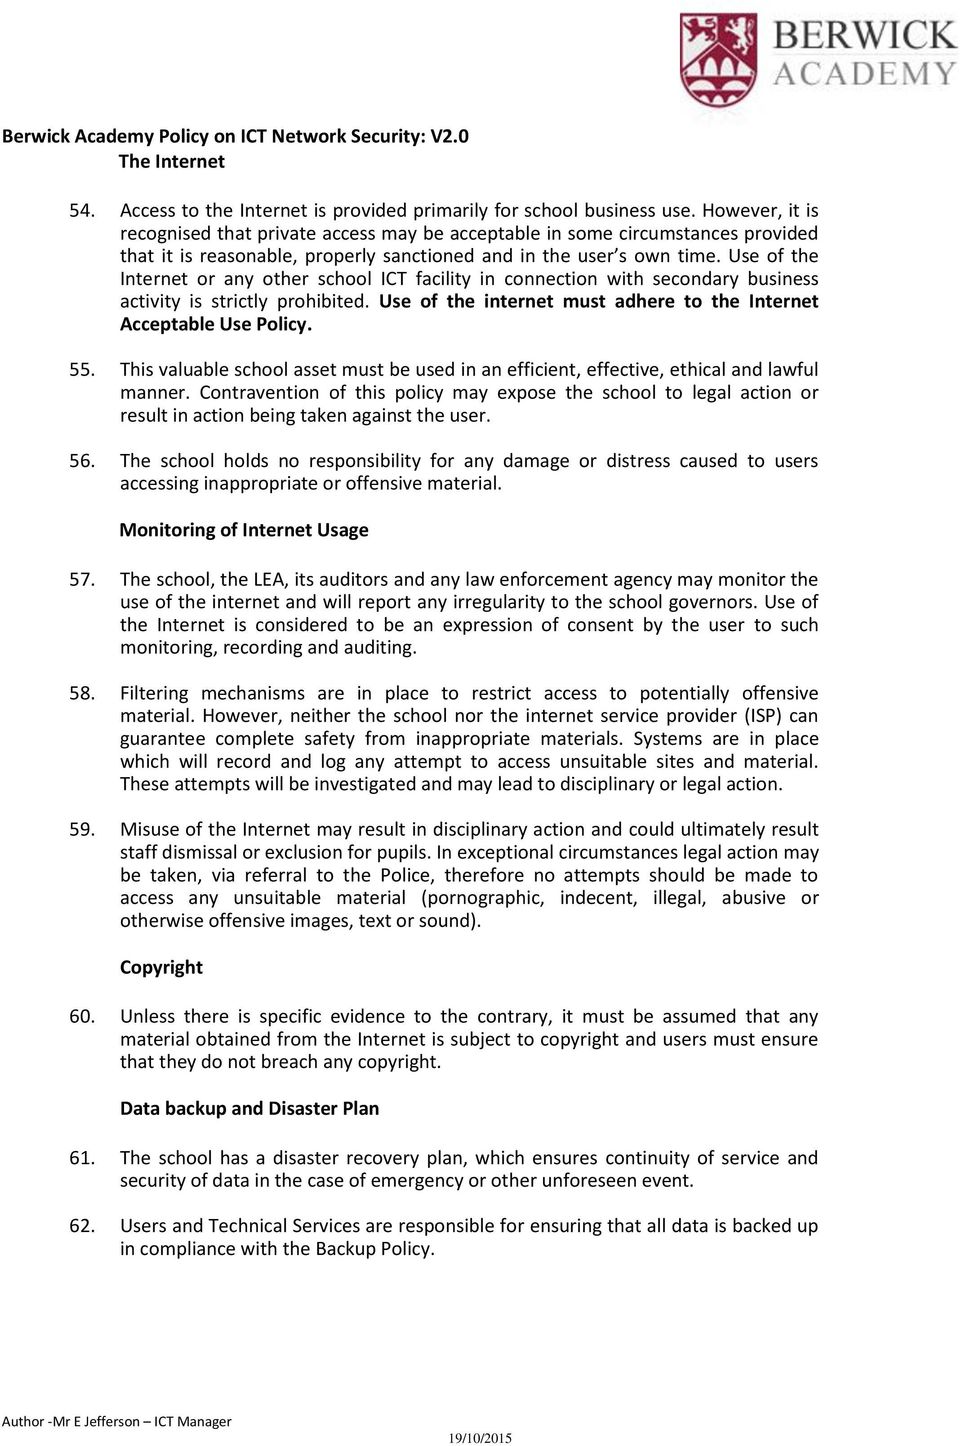 Use of the Internet or any other school ICT facility in connection with secondary business activity is strictly prohibited. Use of the internet must adhere to the Internet Acceptable Use Policy. 55.